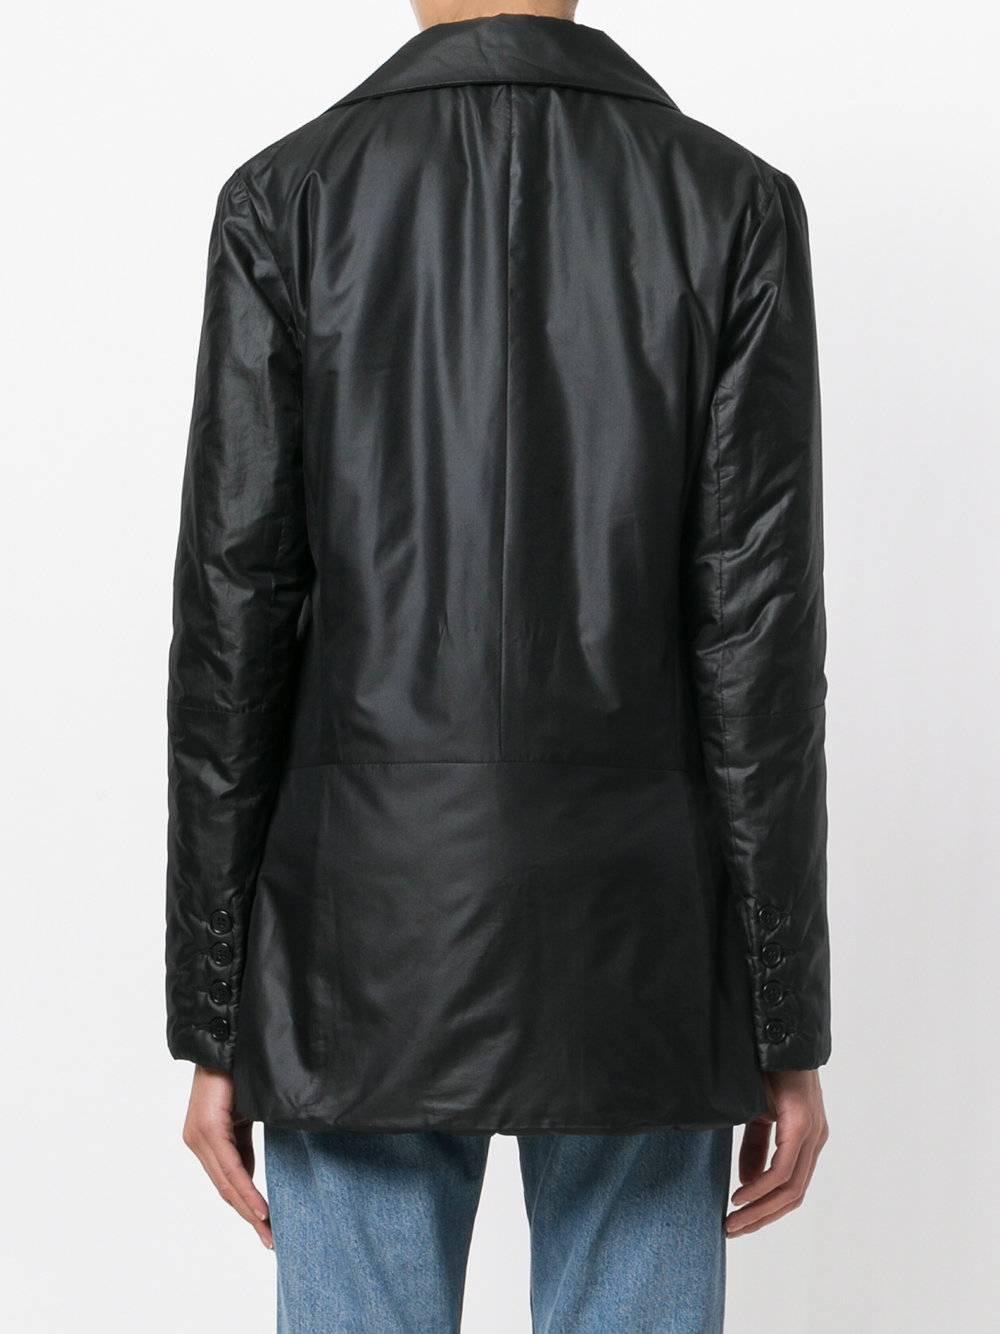 1997 Helmut Lang padded jacket with a traditional double-breasted fastening in matte black and features classic lapels, long sleeves with button cuffs, front flap pockets and a straight hem

Composition:
polyester 100%

Outer Composition:
cotton